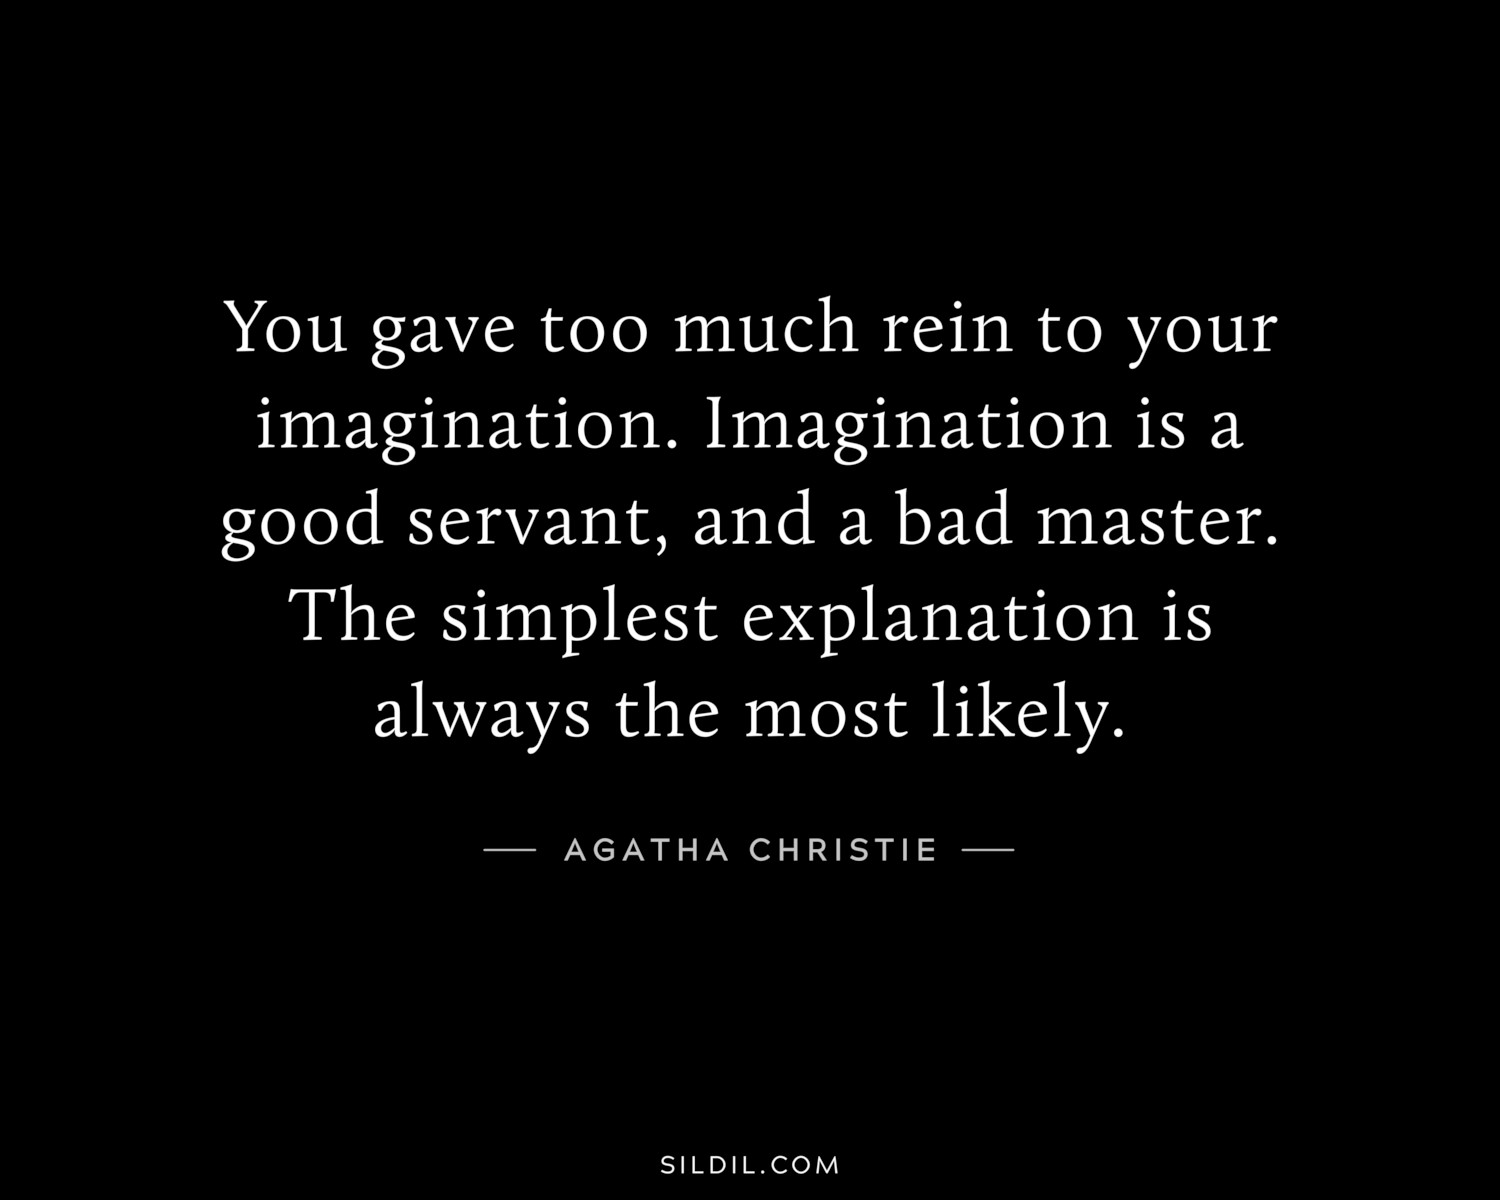 You gave too much rein to your imagination. Imagination is a good servant, and a bad master. The simplest explanation is always the most likely.